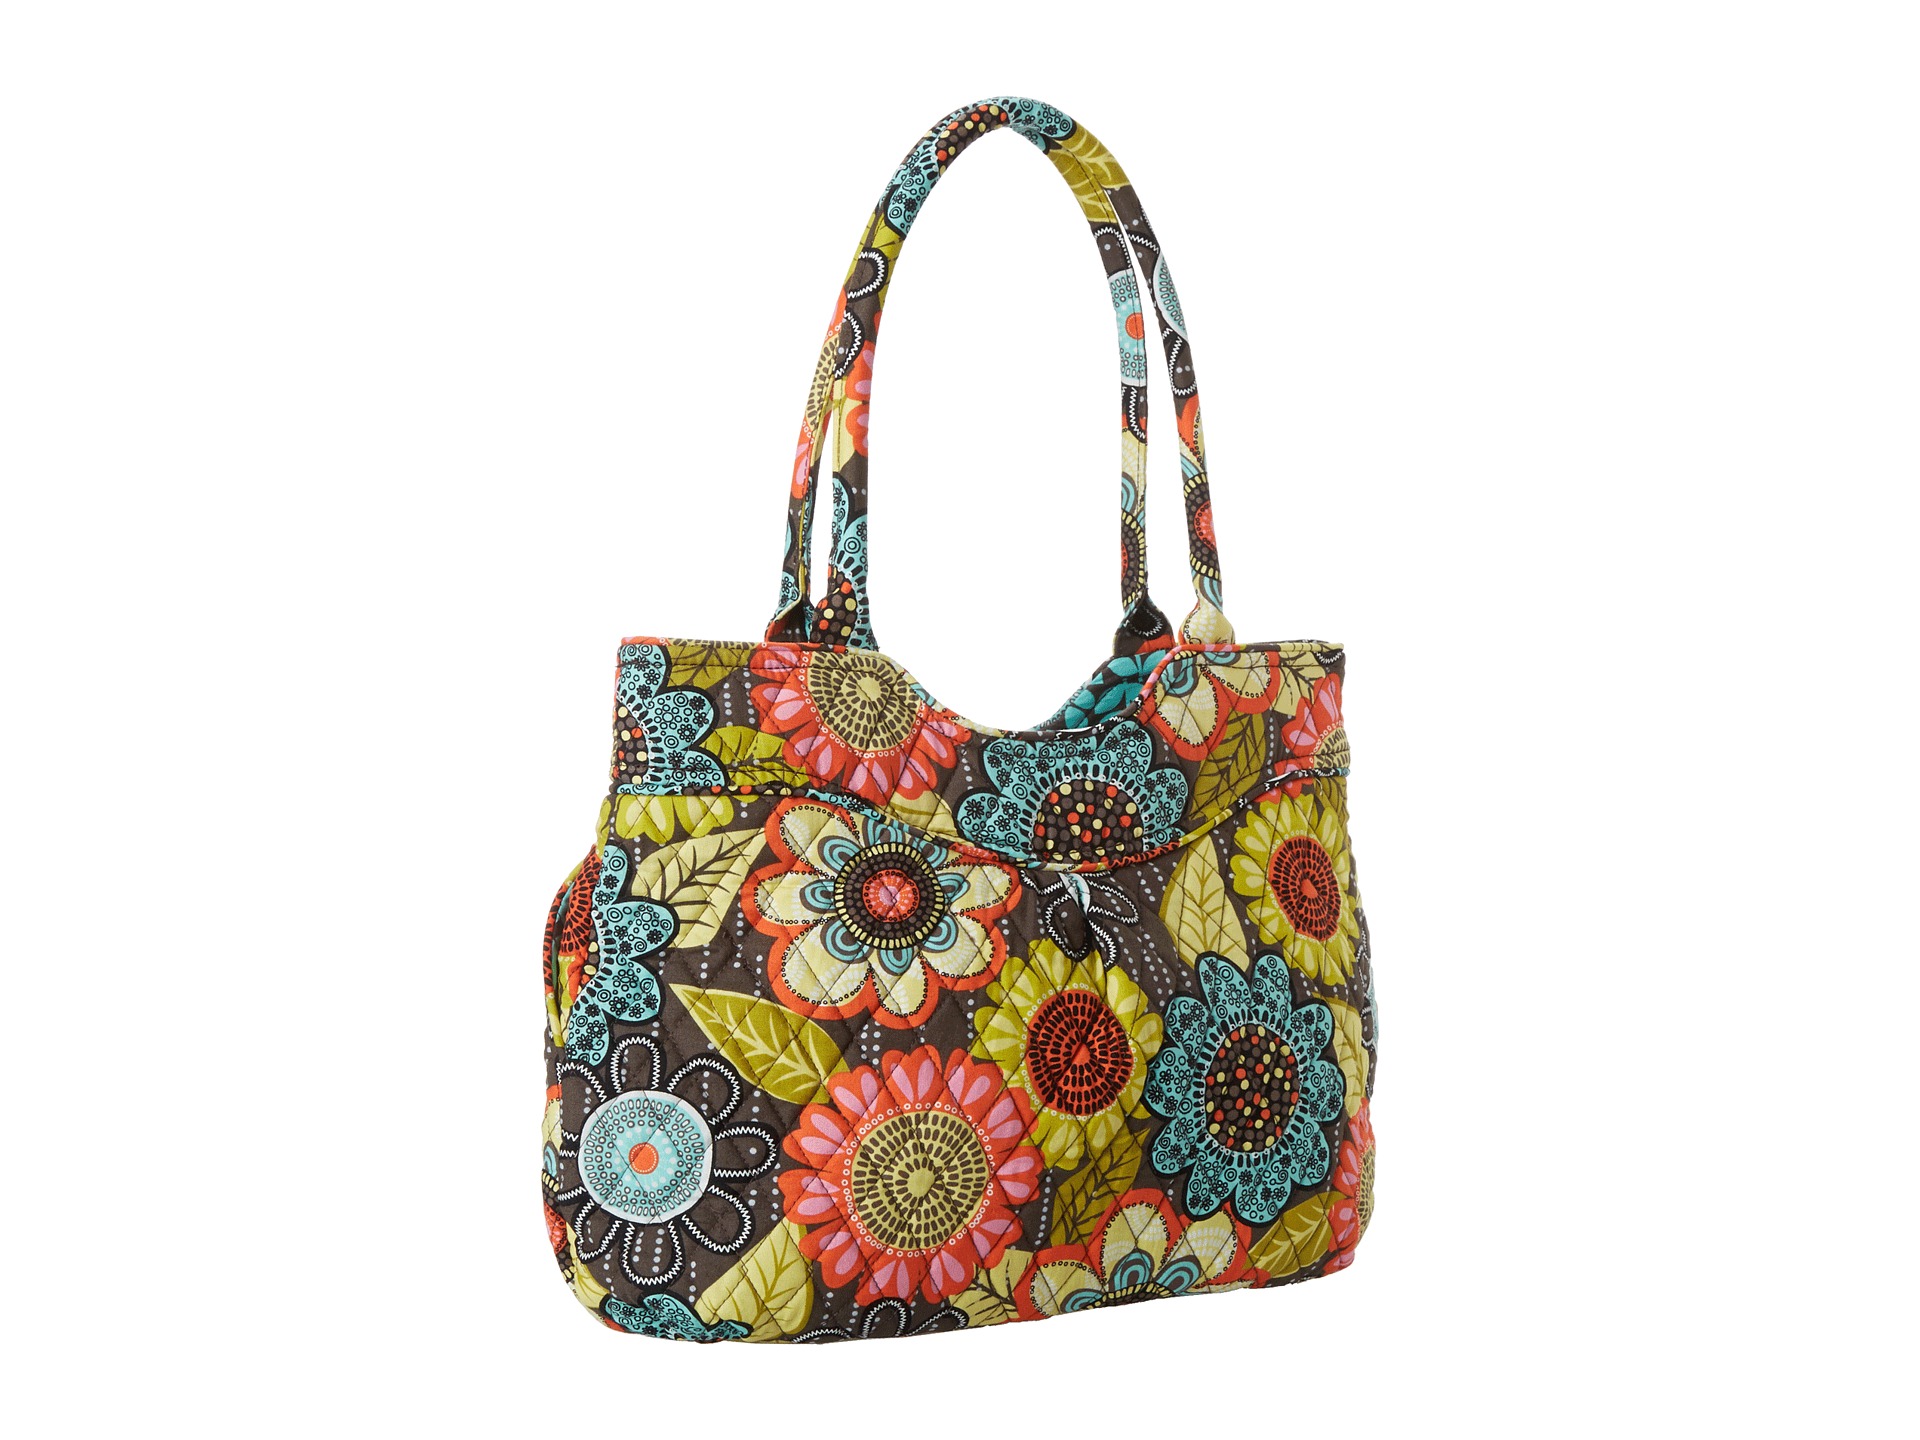 Vera Bradley Pleated Shoulder Bag Flower Shower | Shipped Free at Zappos